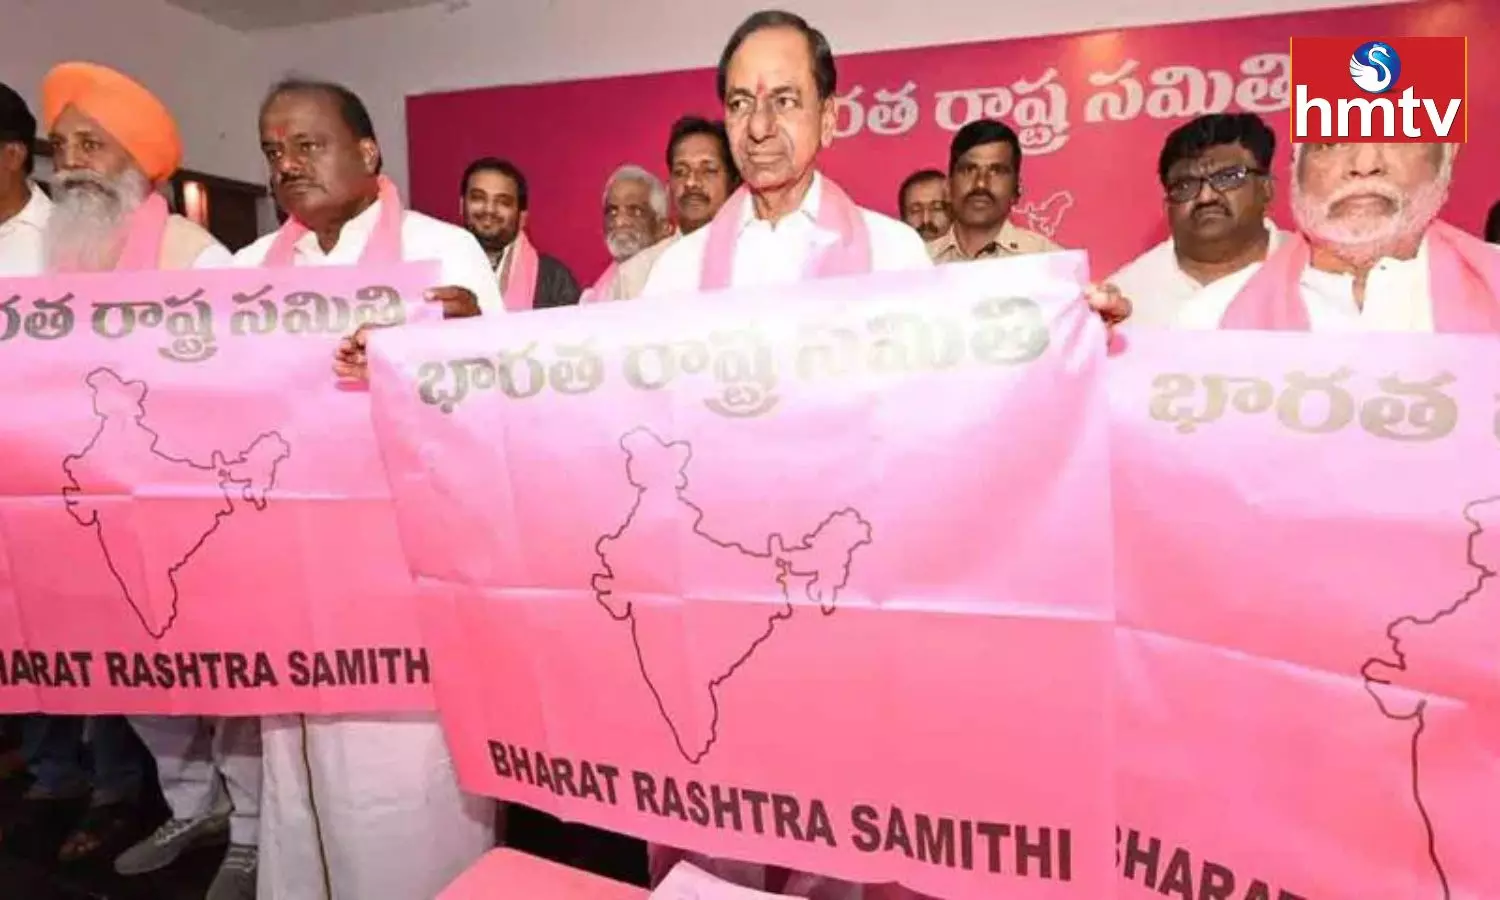 BRS Flag Flies on Delhis Red Fort Says CM KCR